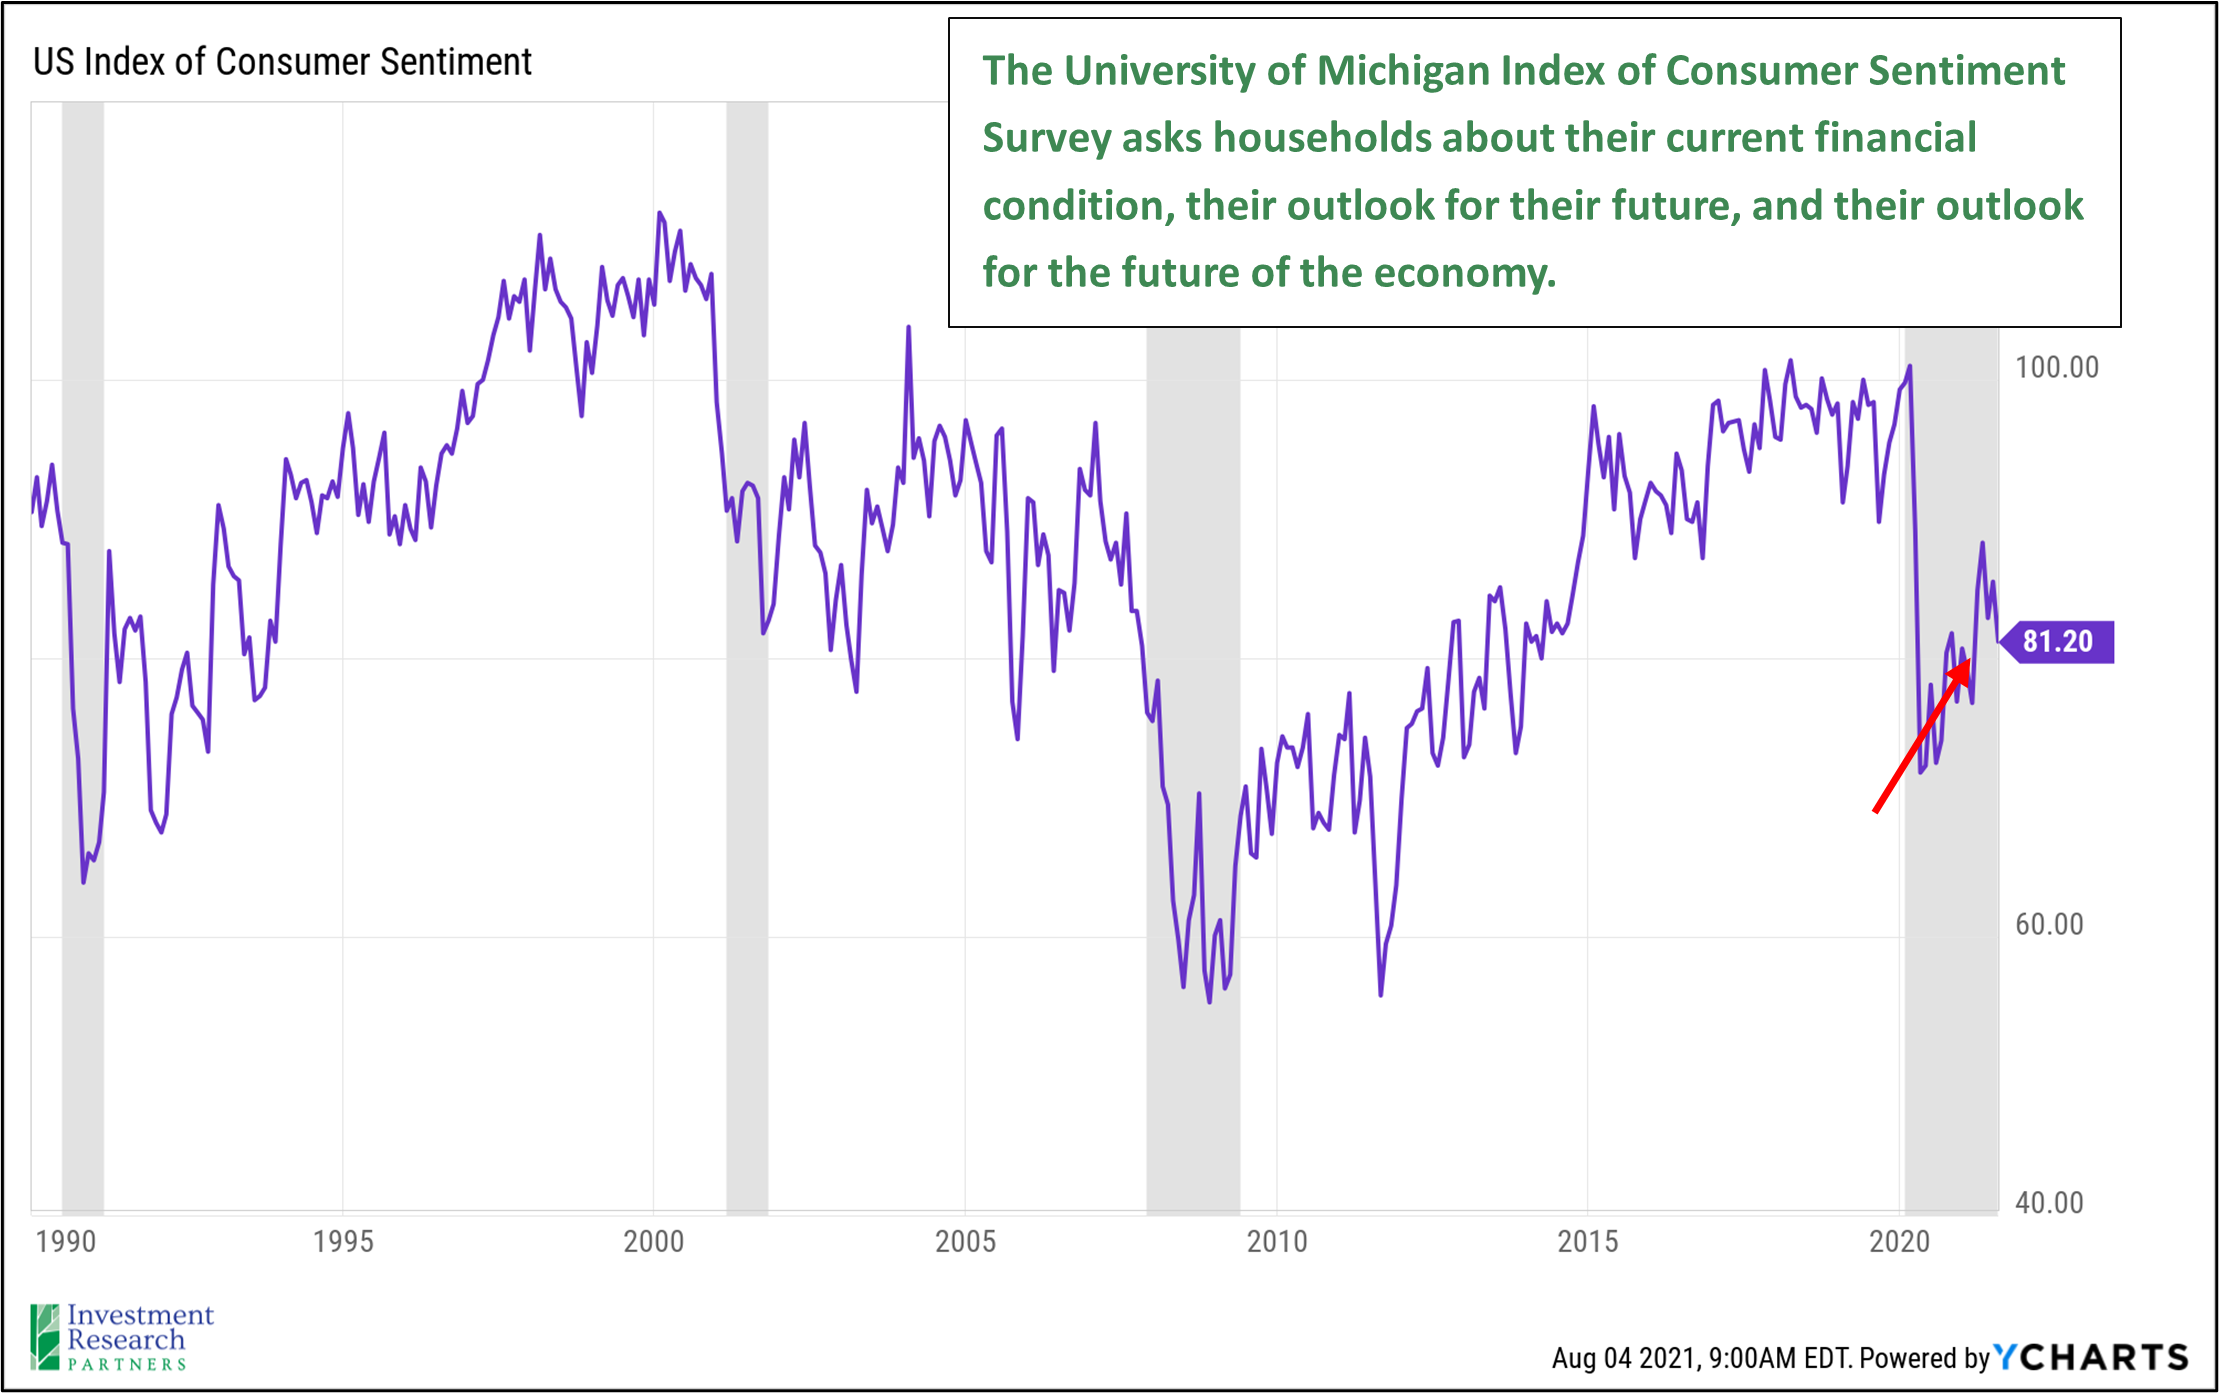 Line graph depicting US Index of Consumer Sentiment from 1990 to 2021 with note: The University of Michigan Index of Consumer Sentiment Survey asks households about their current financial condition, their outlook for their future, and their outlook for the future of the economy.